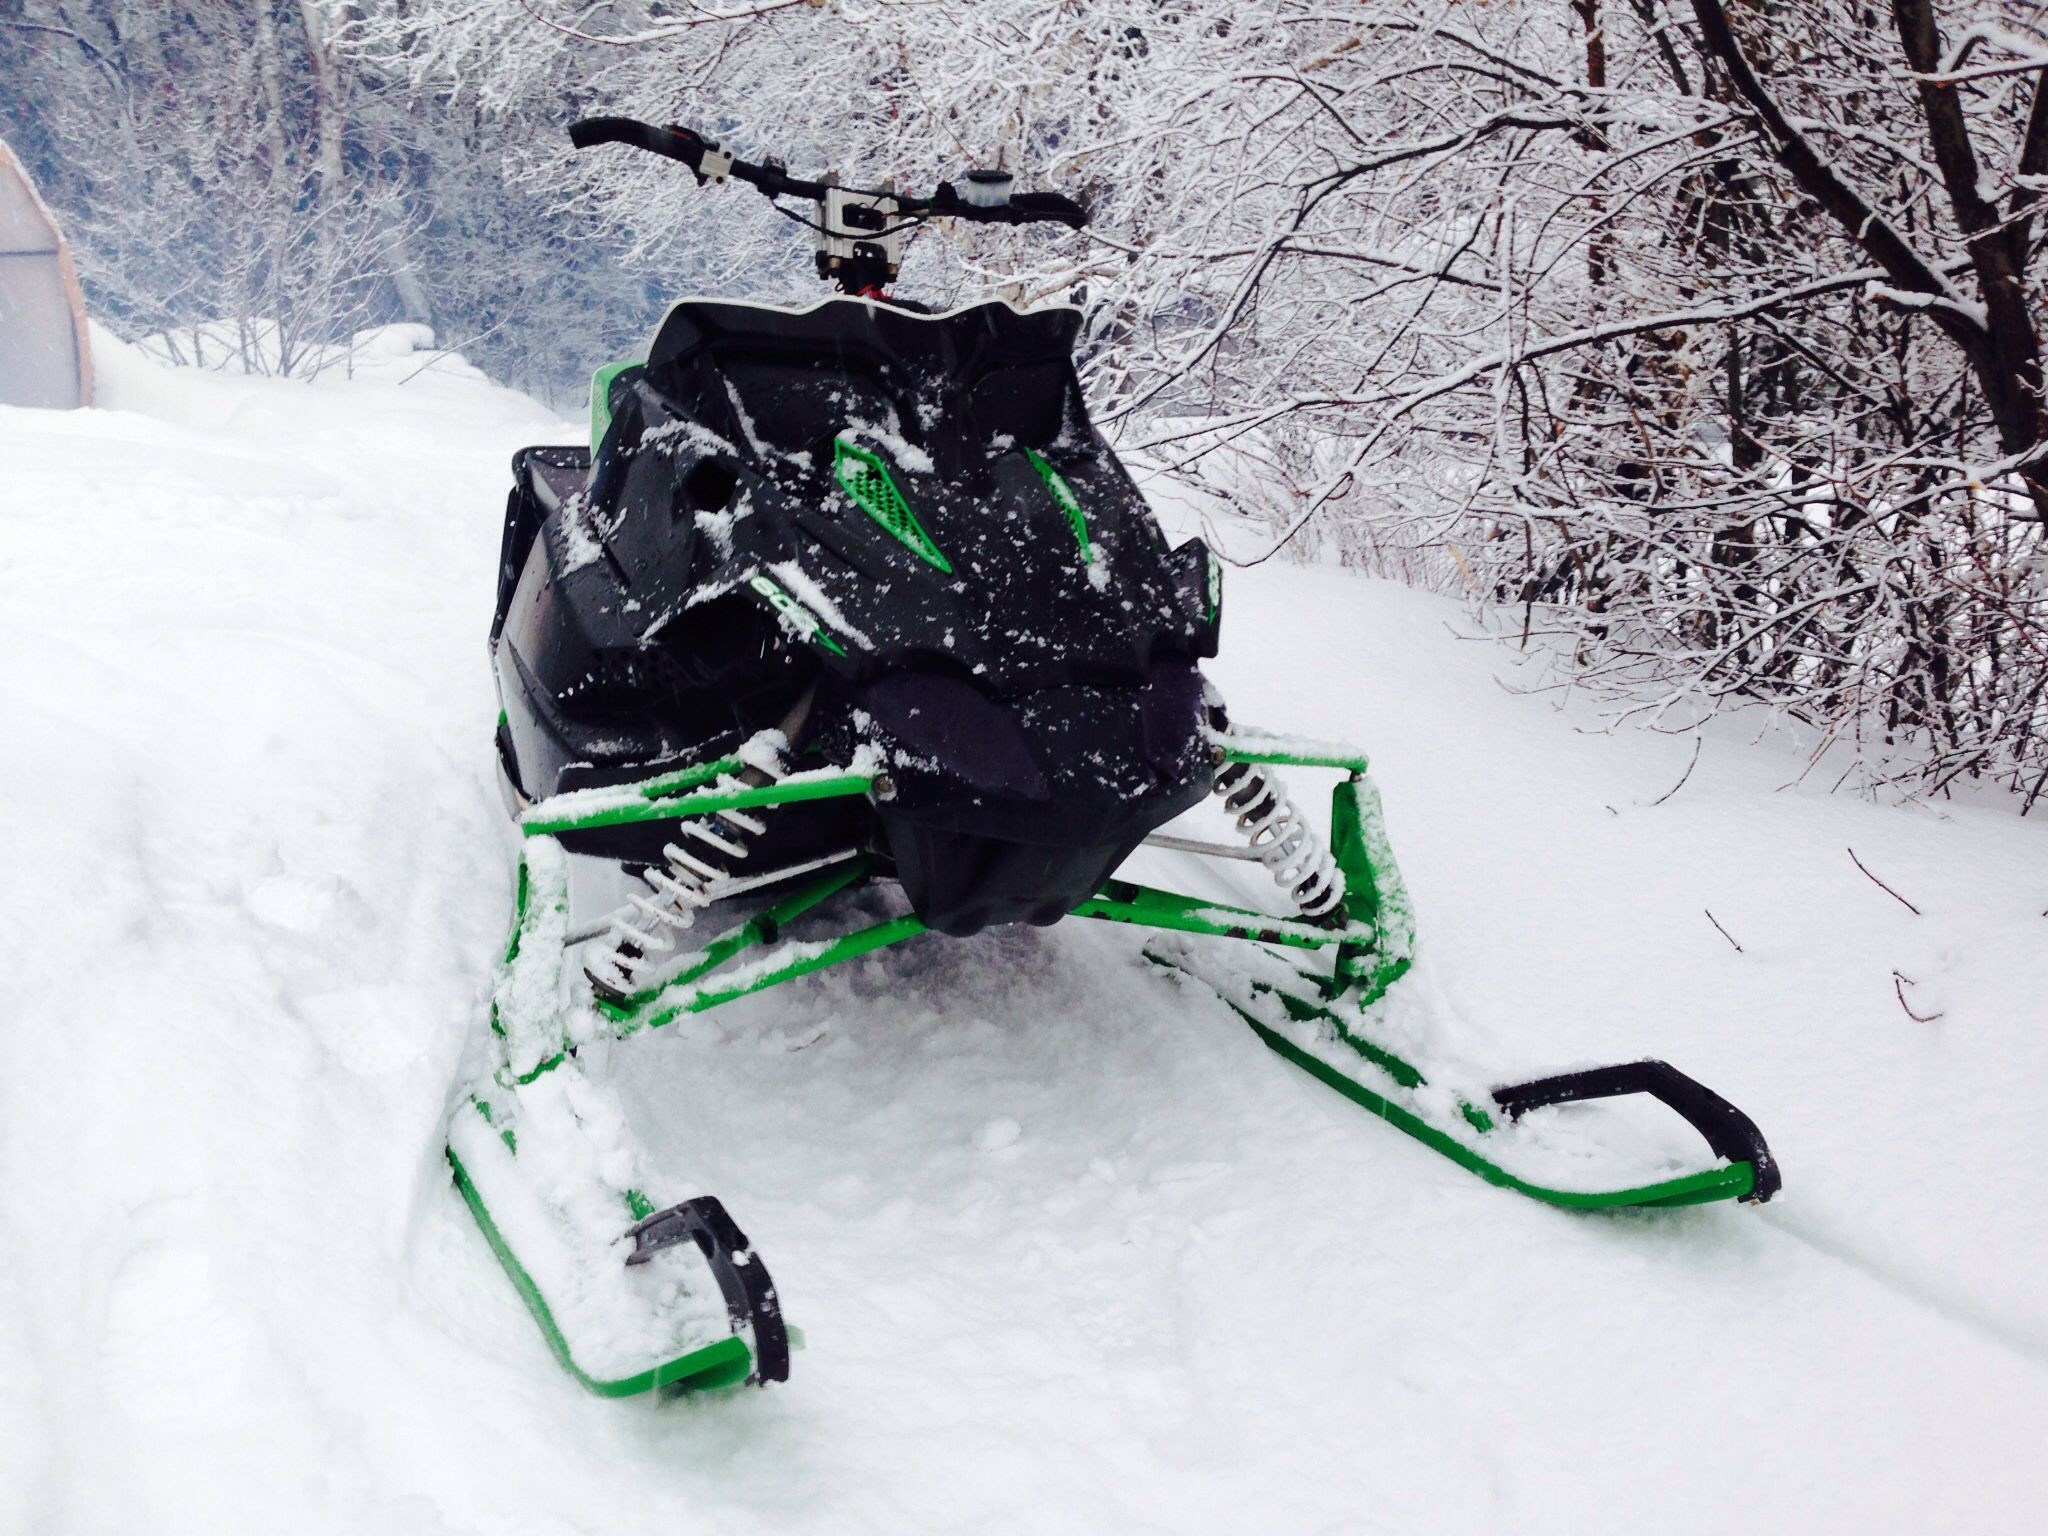 2048x1536 2008 Arctic Cat Sno Pro 600 Sled, Snowboarding, Arctic, Gears, Lead Sled